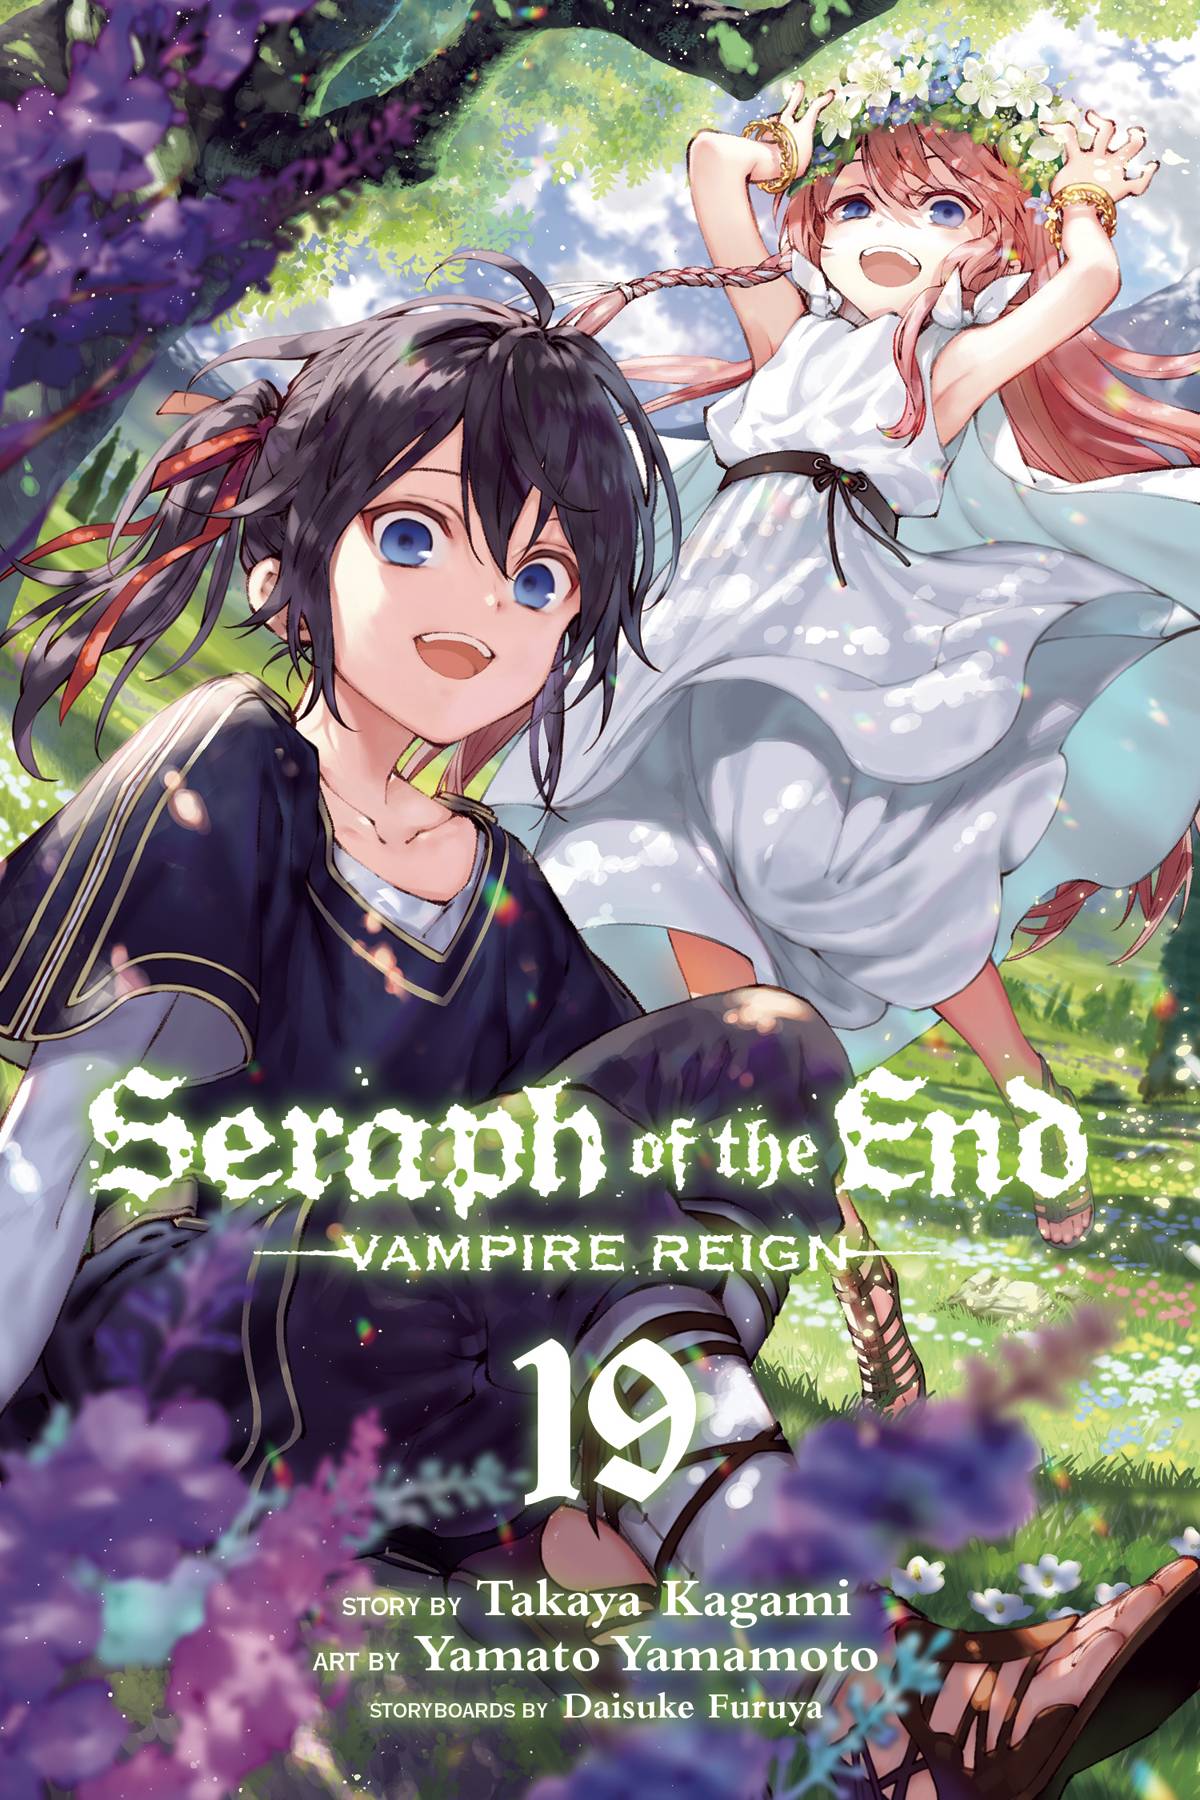 Seraph of the End: Vampire Reign #19 (2020)